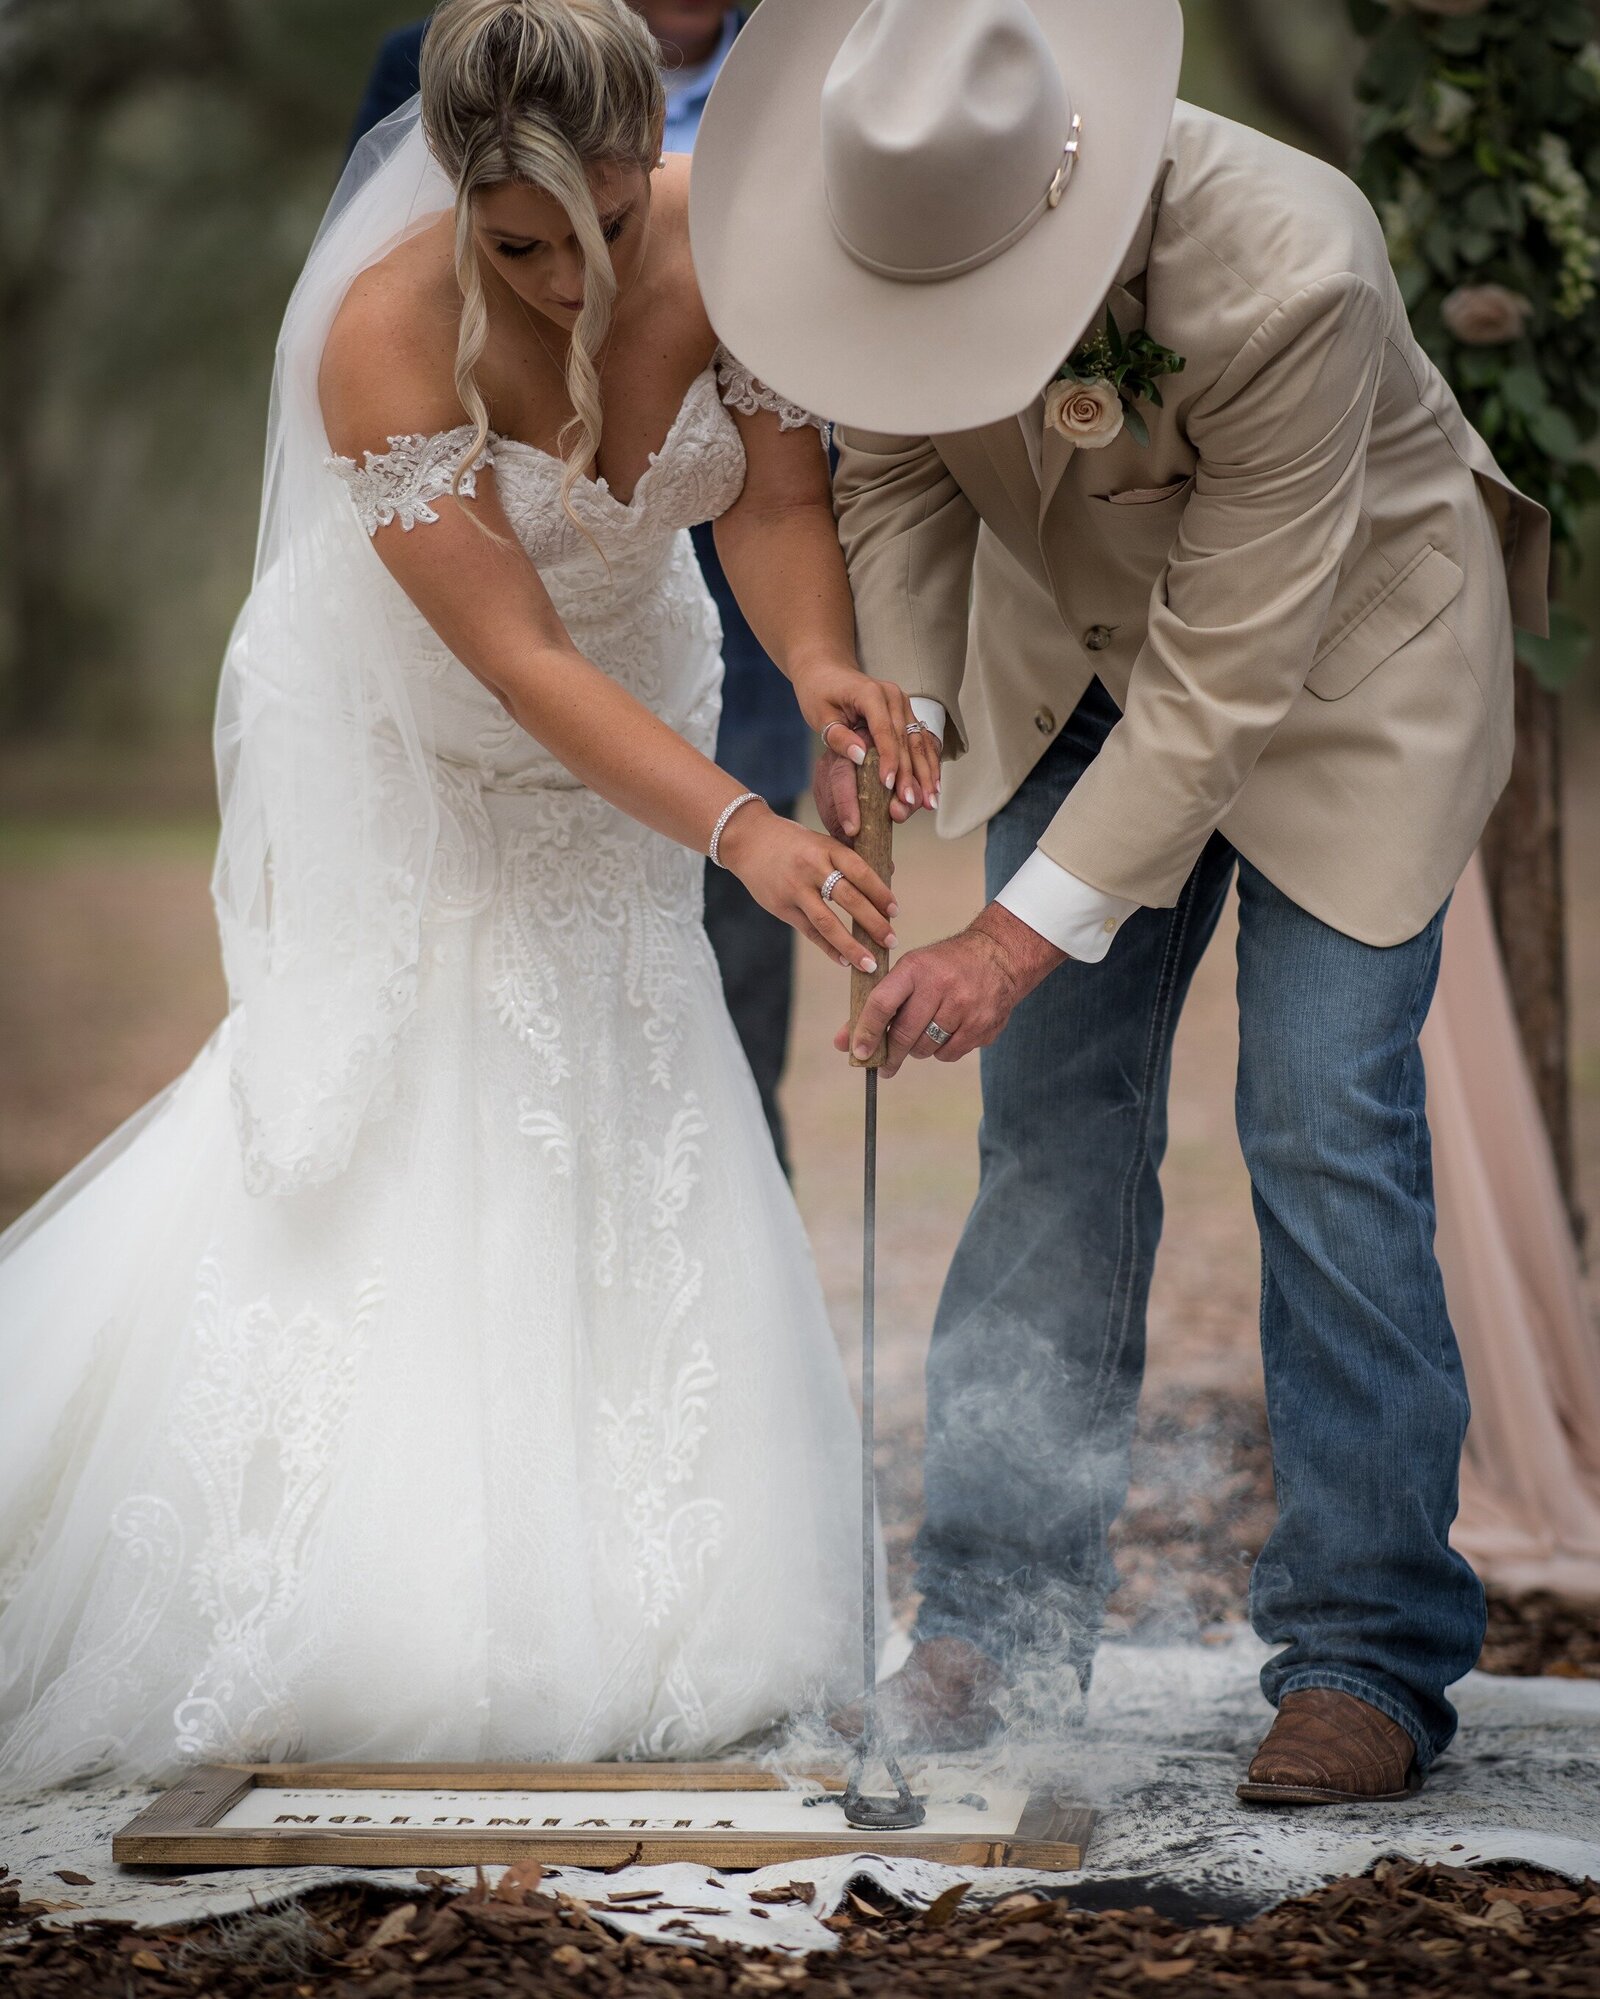 Legacy at Oak Meadows Wedding Venue - Pierson - Gainesville Florida - Weddings and Events23